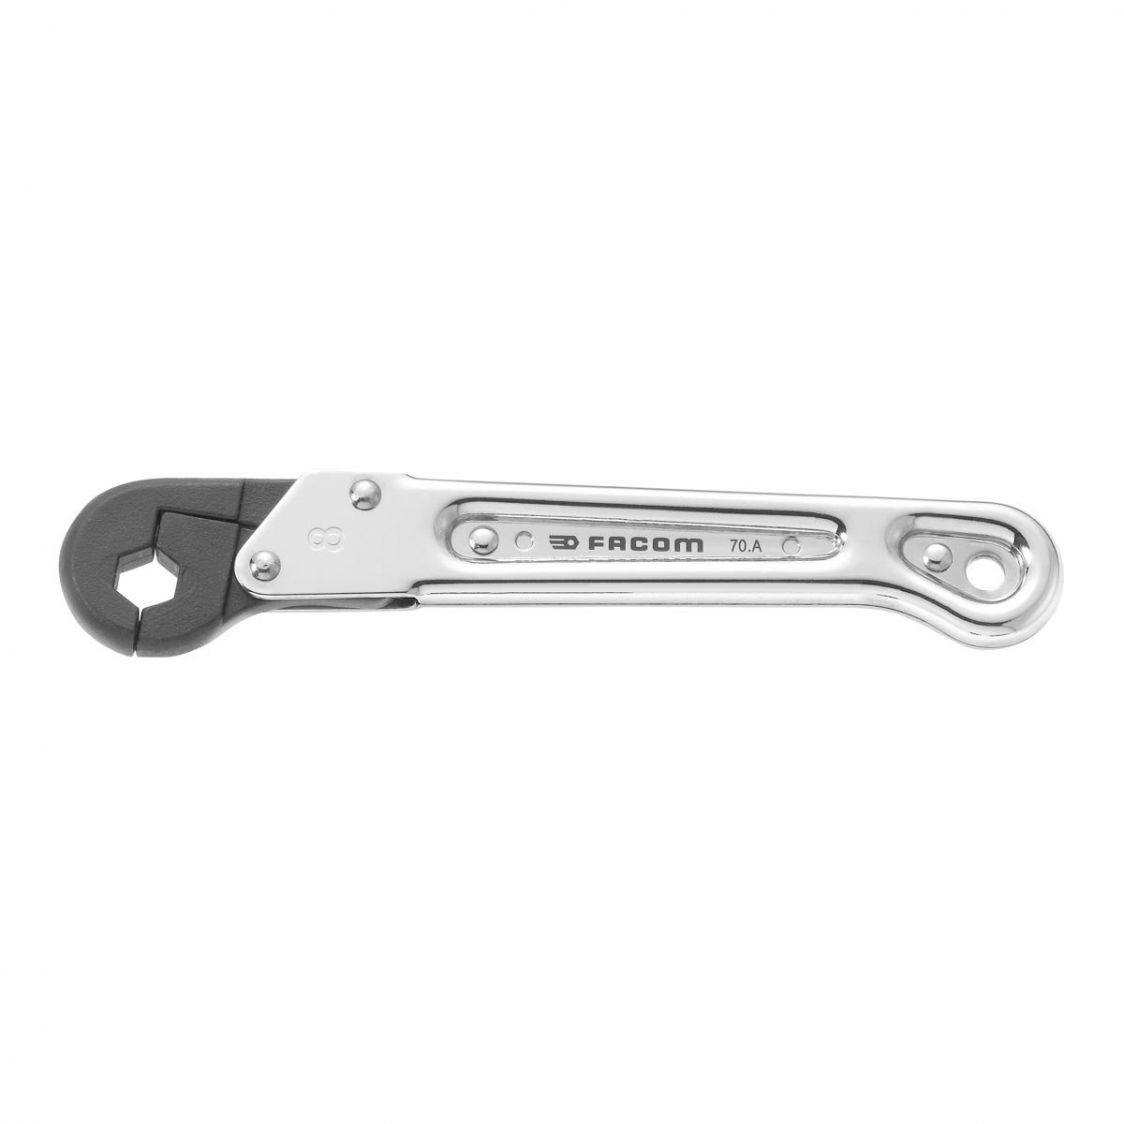 FACOM 70A.10 - 10mm Metric Ratchet Flare Nut Spanner